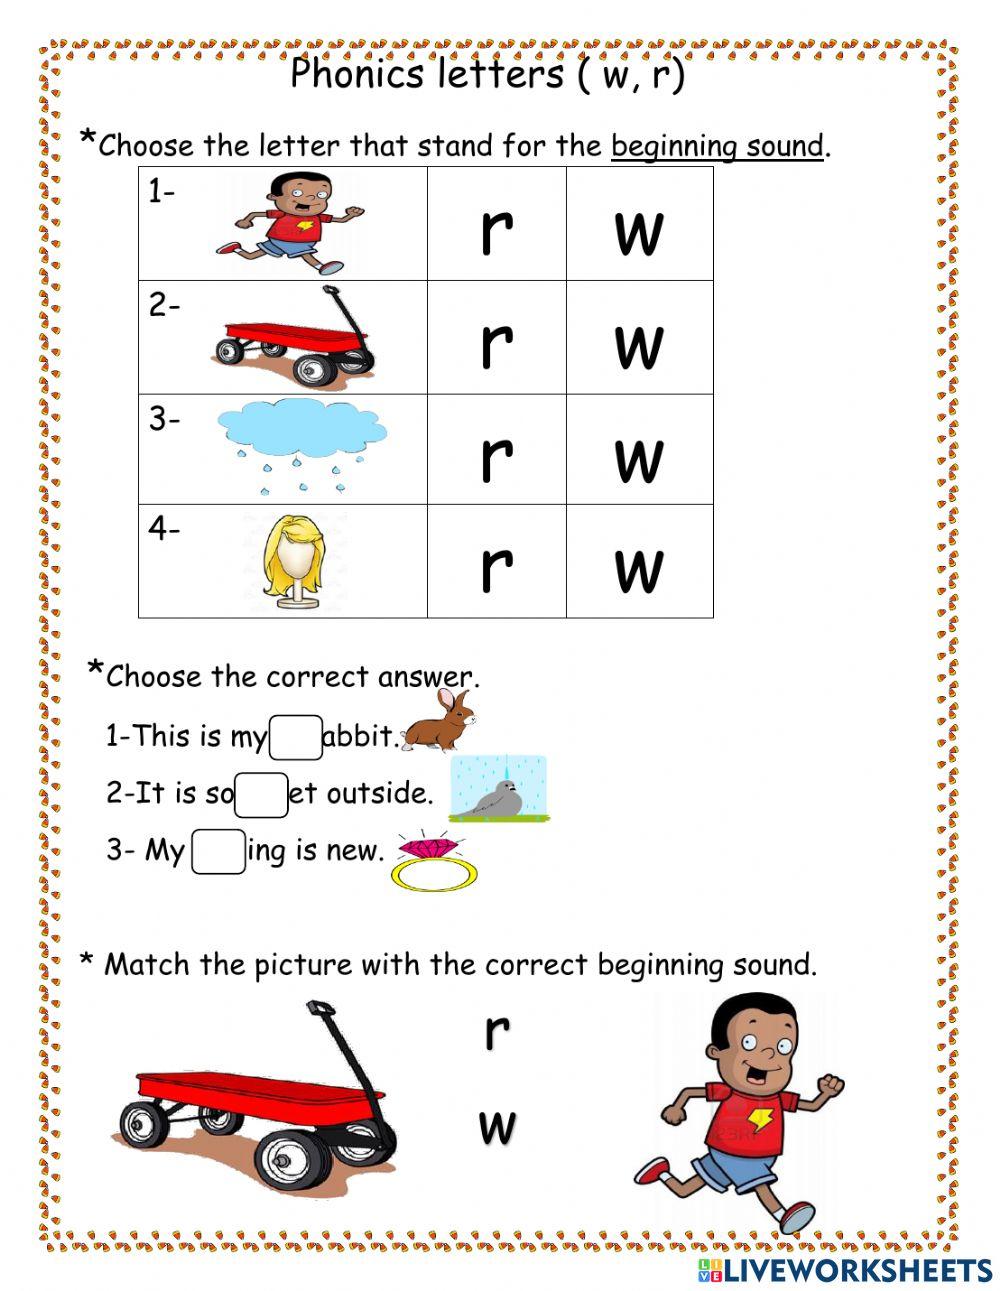 Letters sound (w,r)